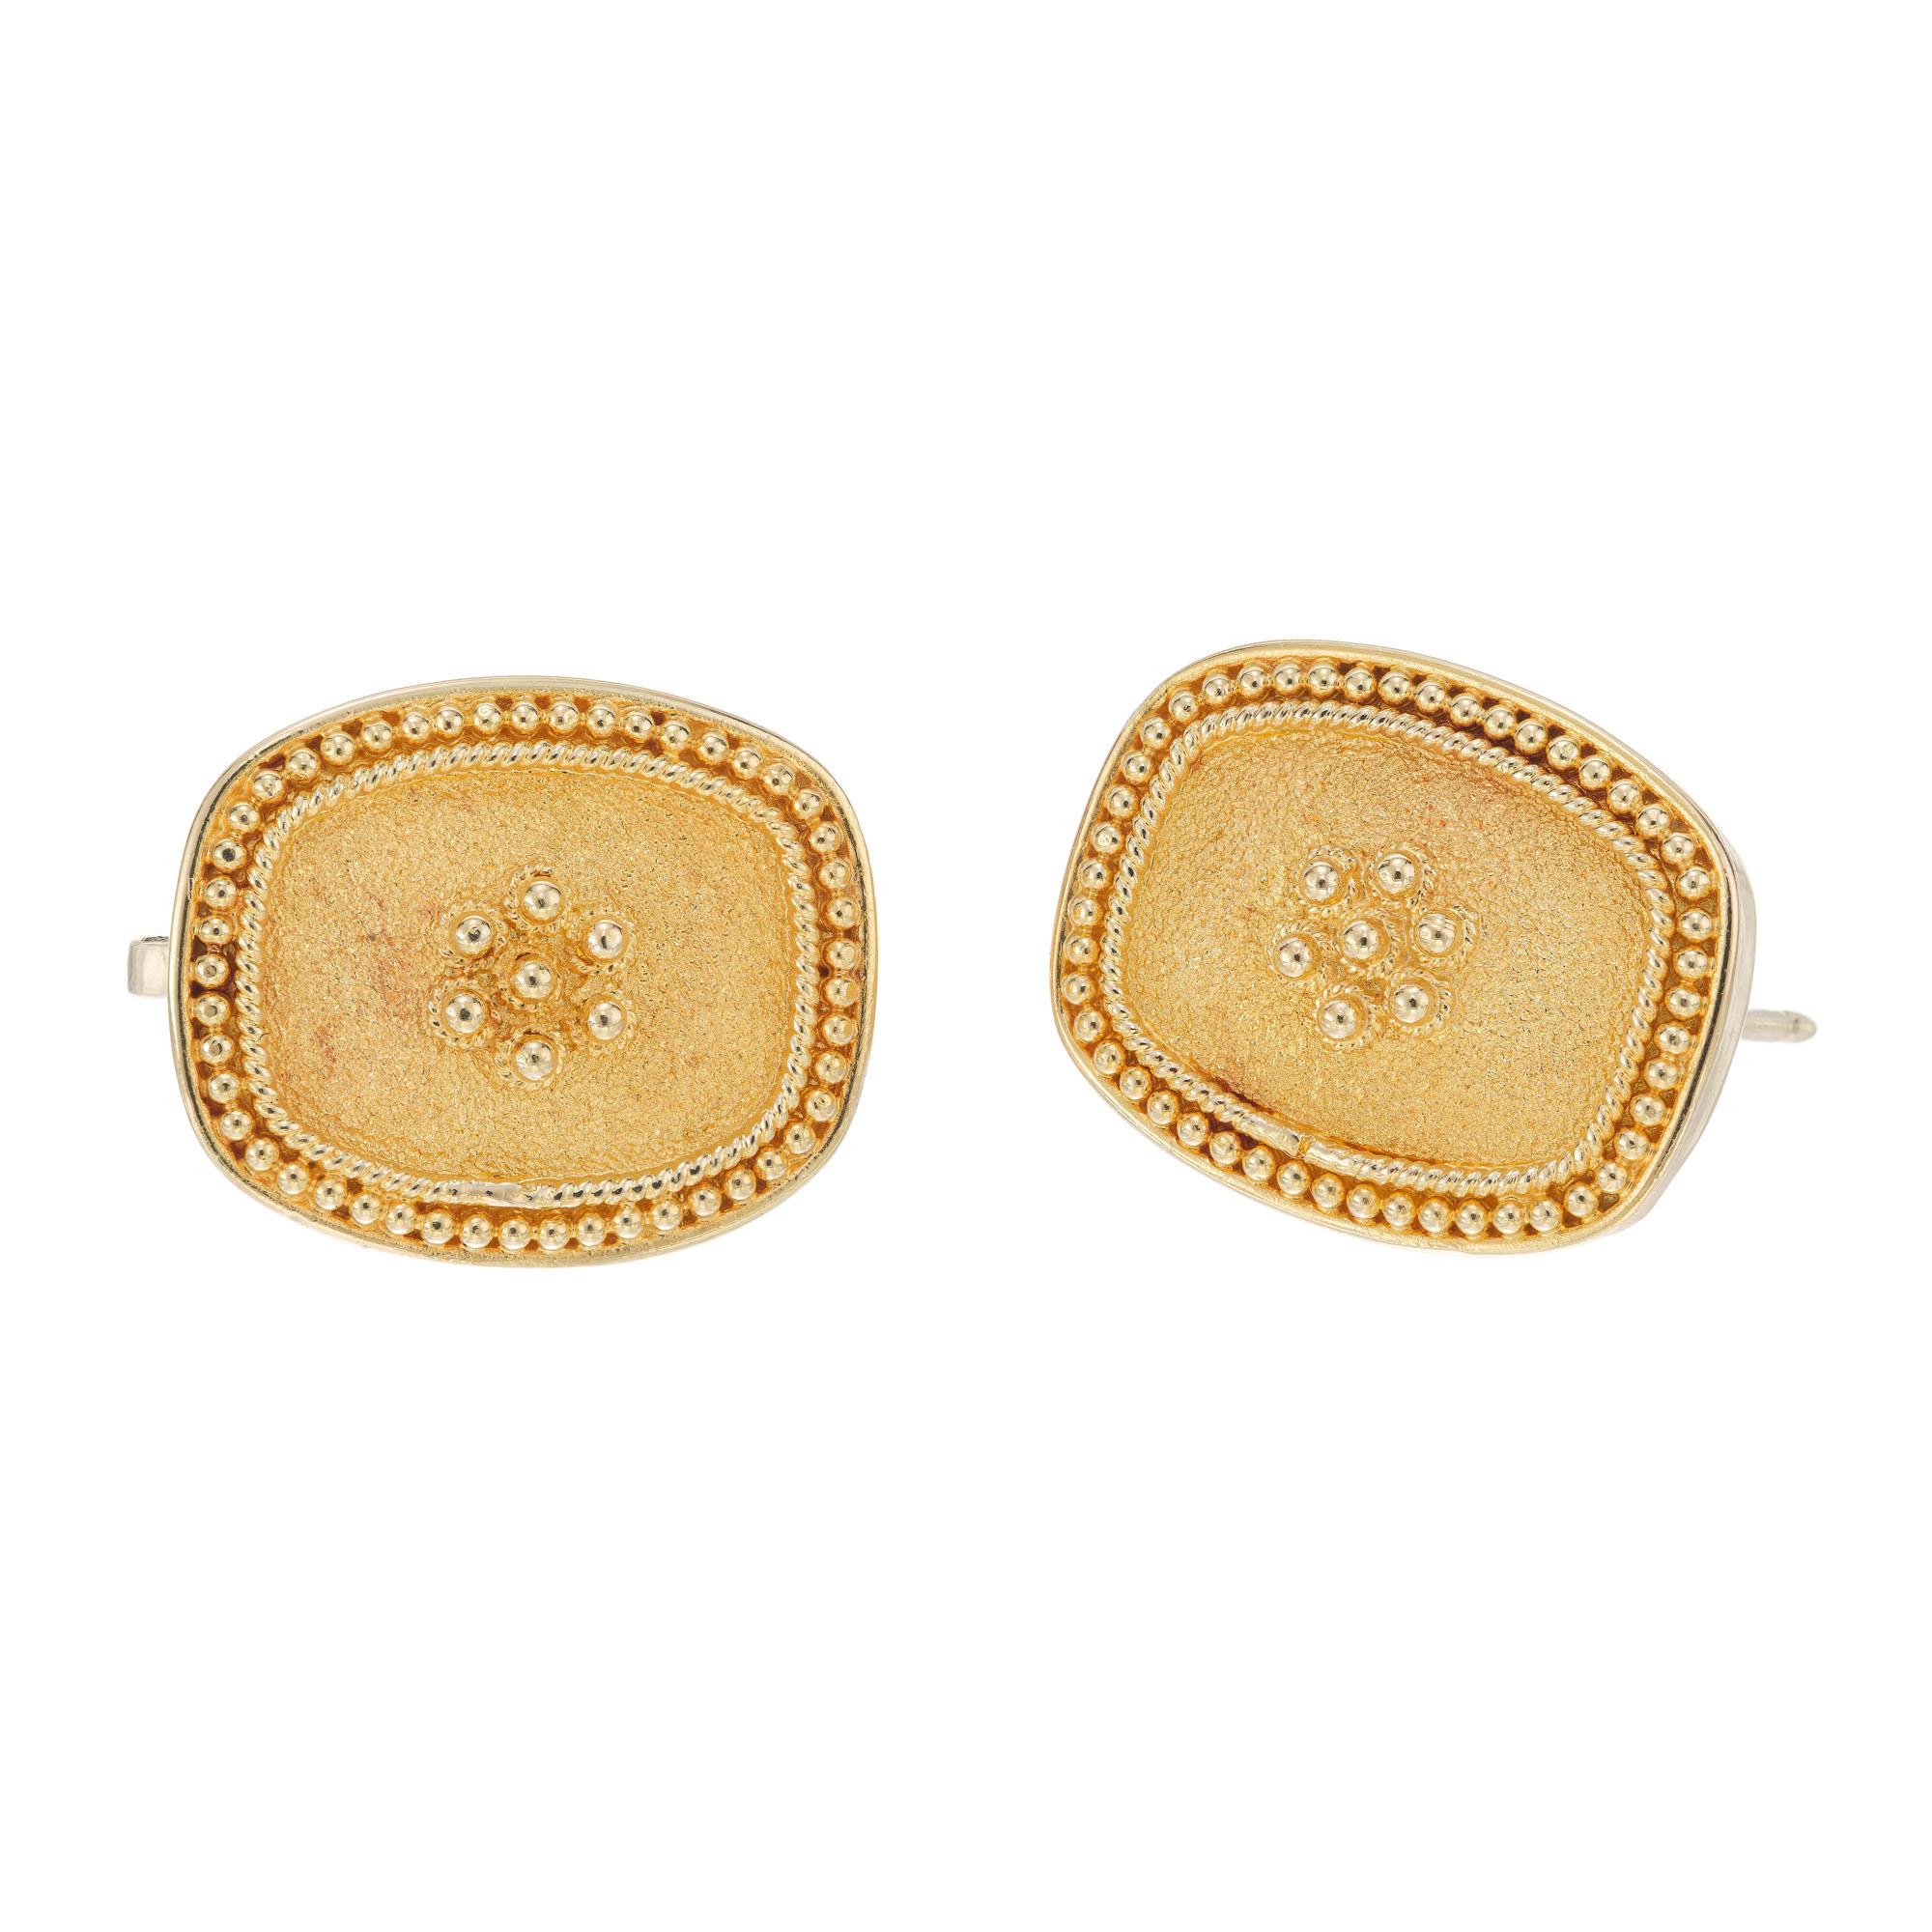 Textured 18k yellow gold clip post earrings. Safe secure clip backs.

18k yellow gold 
Stamped: 750
11.3 grams
Top to bottom: 17.8mmor 11/16 Inches 
Width: 14.6mm or .5 Inch
Depth or thickness: 4.9mm 
 